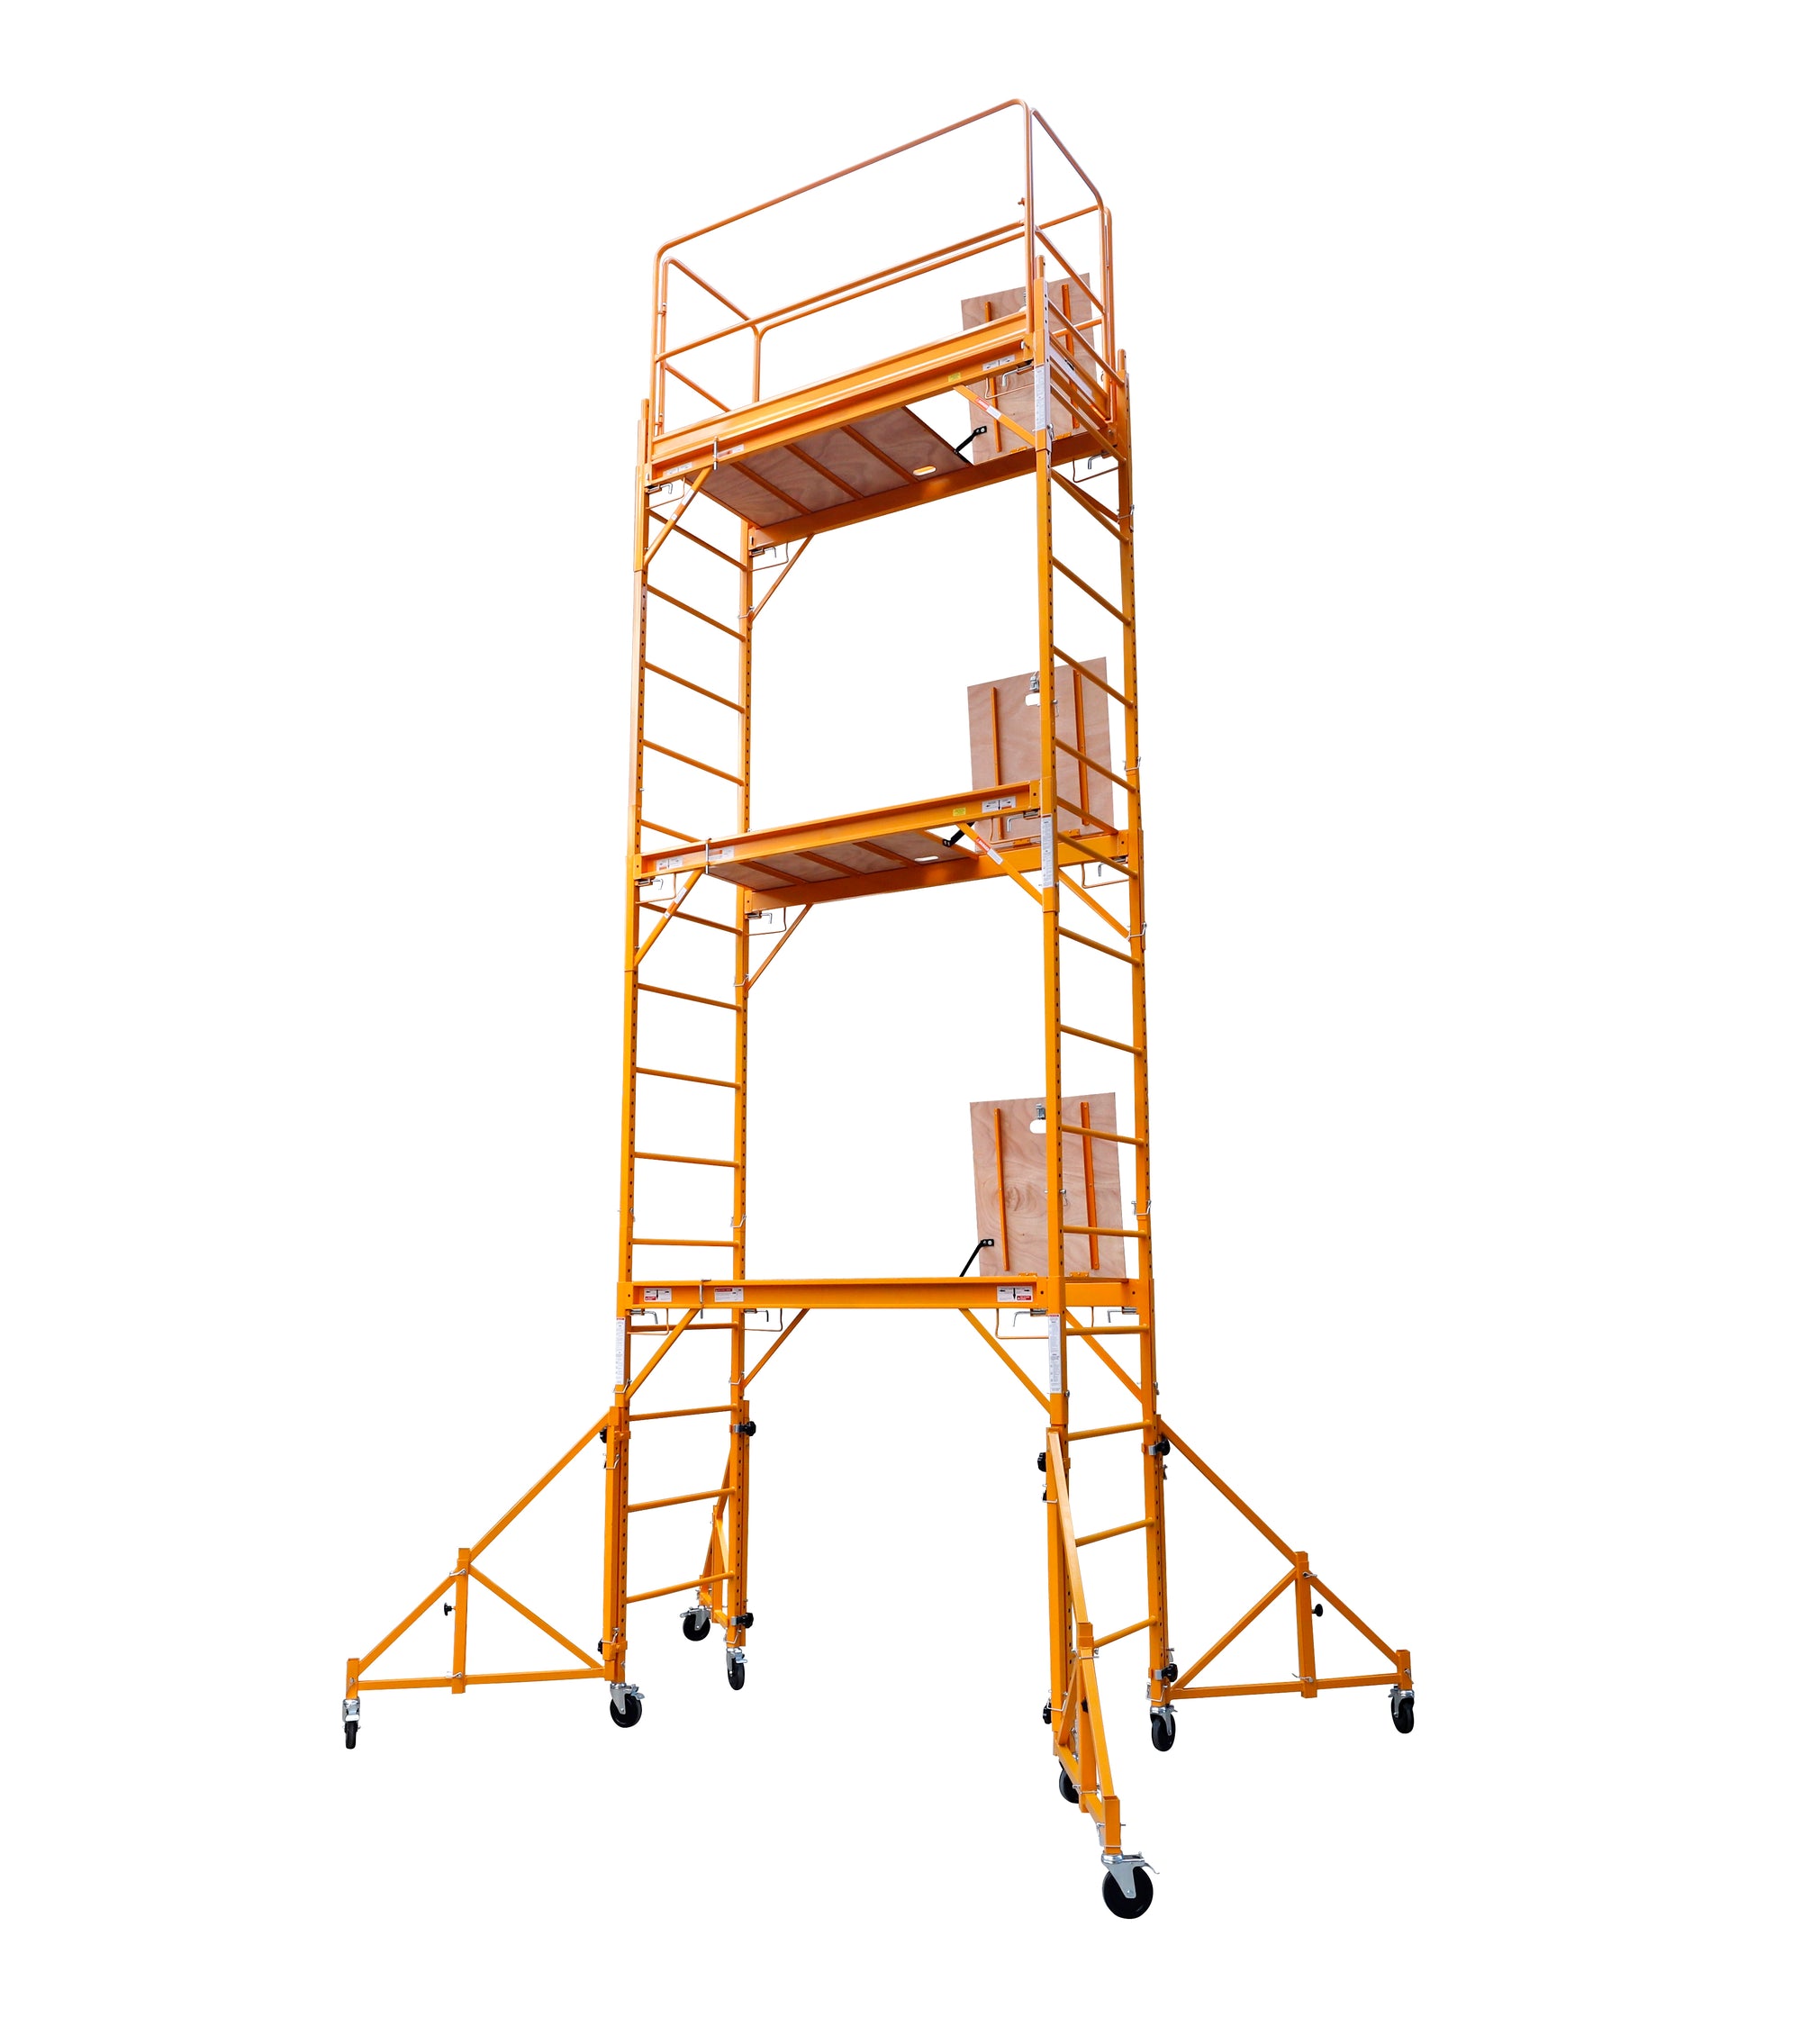 18 Ft High Rolling Scaffold Tower 3 Story 1000 lbs Capacity with Hatch and 36" Adjustable Outriggers Plus Free 8pc base plate